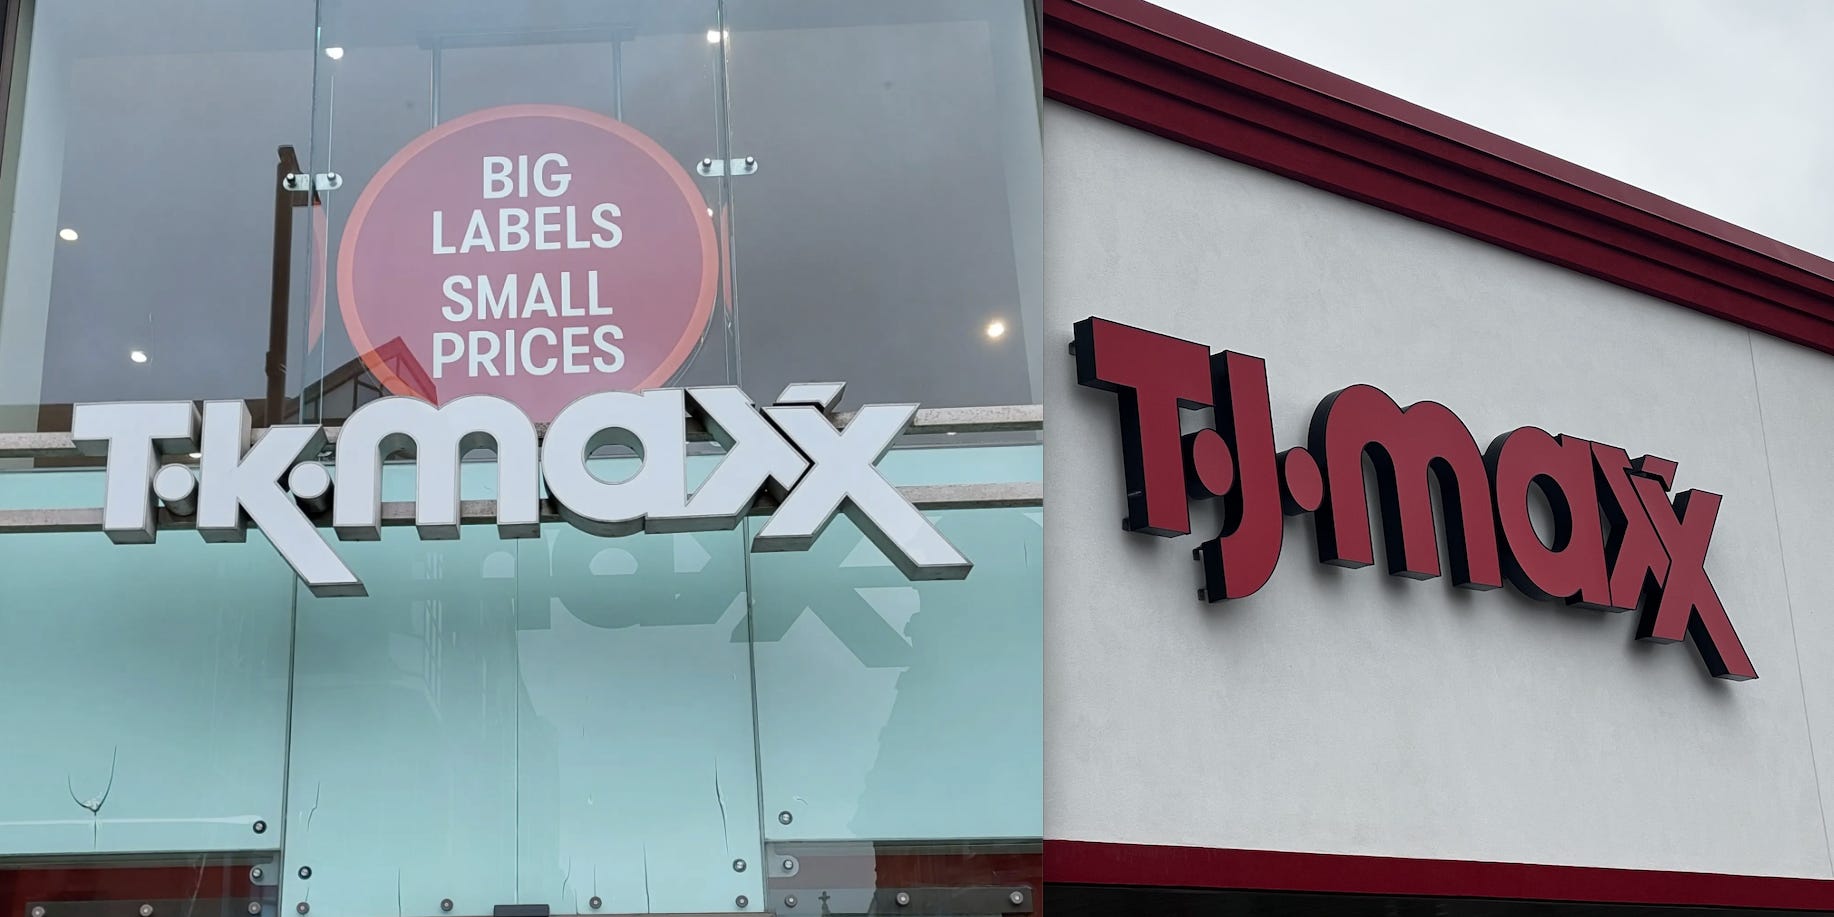 Sales are up at T.J. Maxx as consumers turn to discount retailers. We  visited stores in the US and UK and found that both had great bargains but  were a mess to